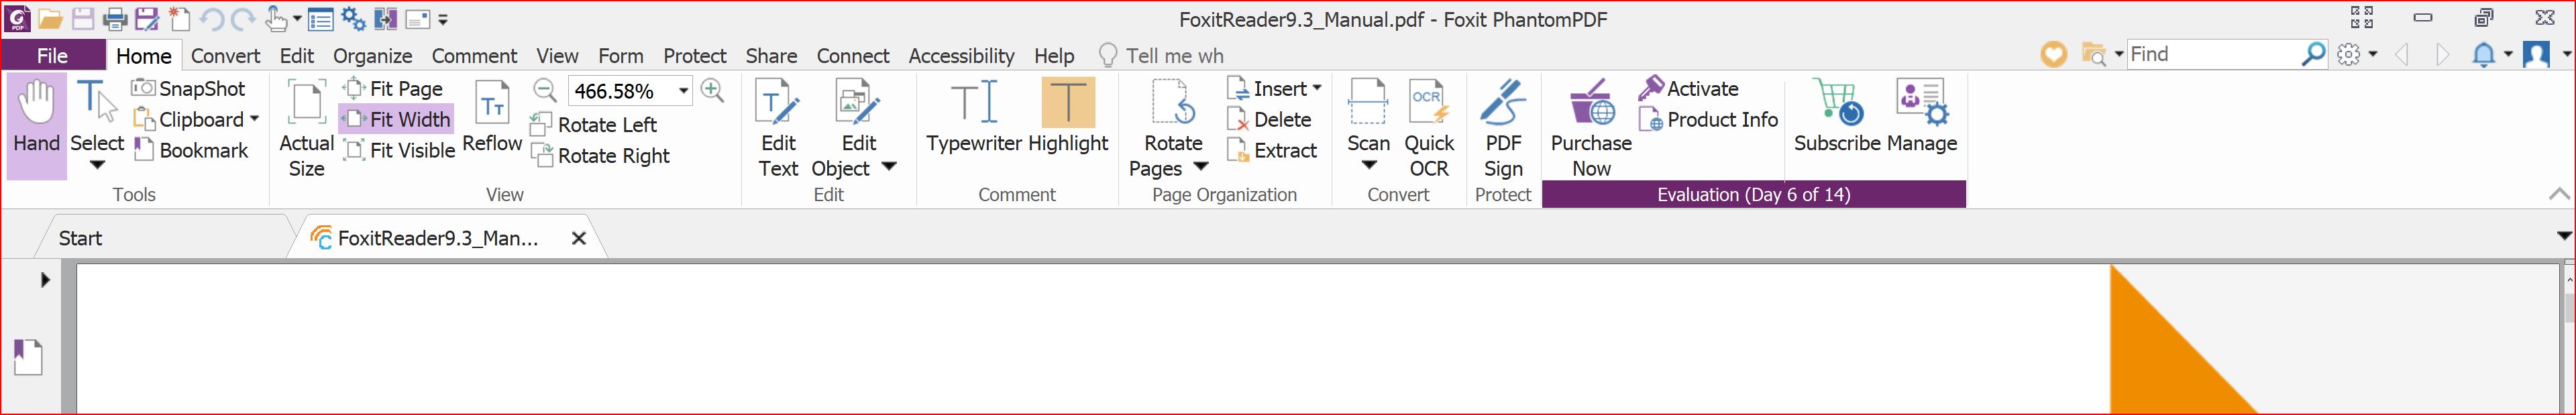 Foxit Pdf Reader Solutions Experts Exchange